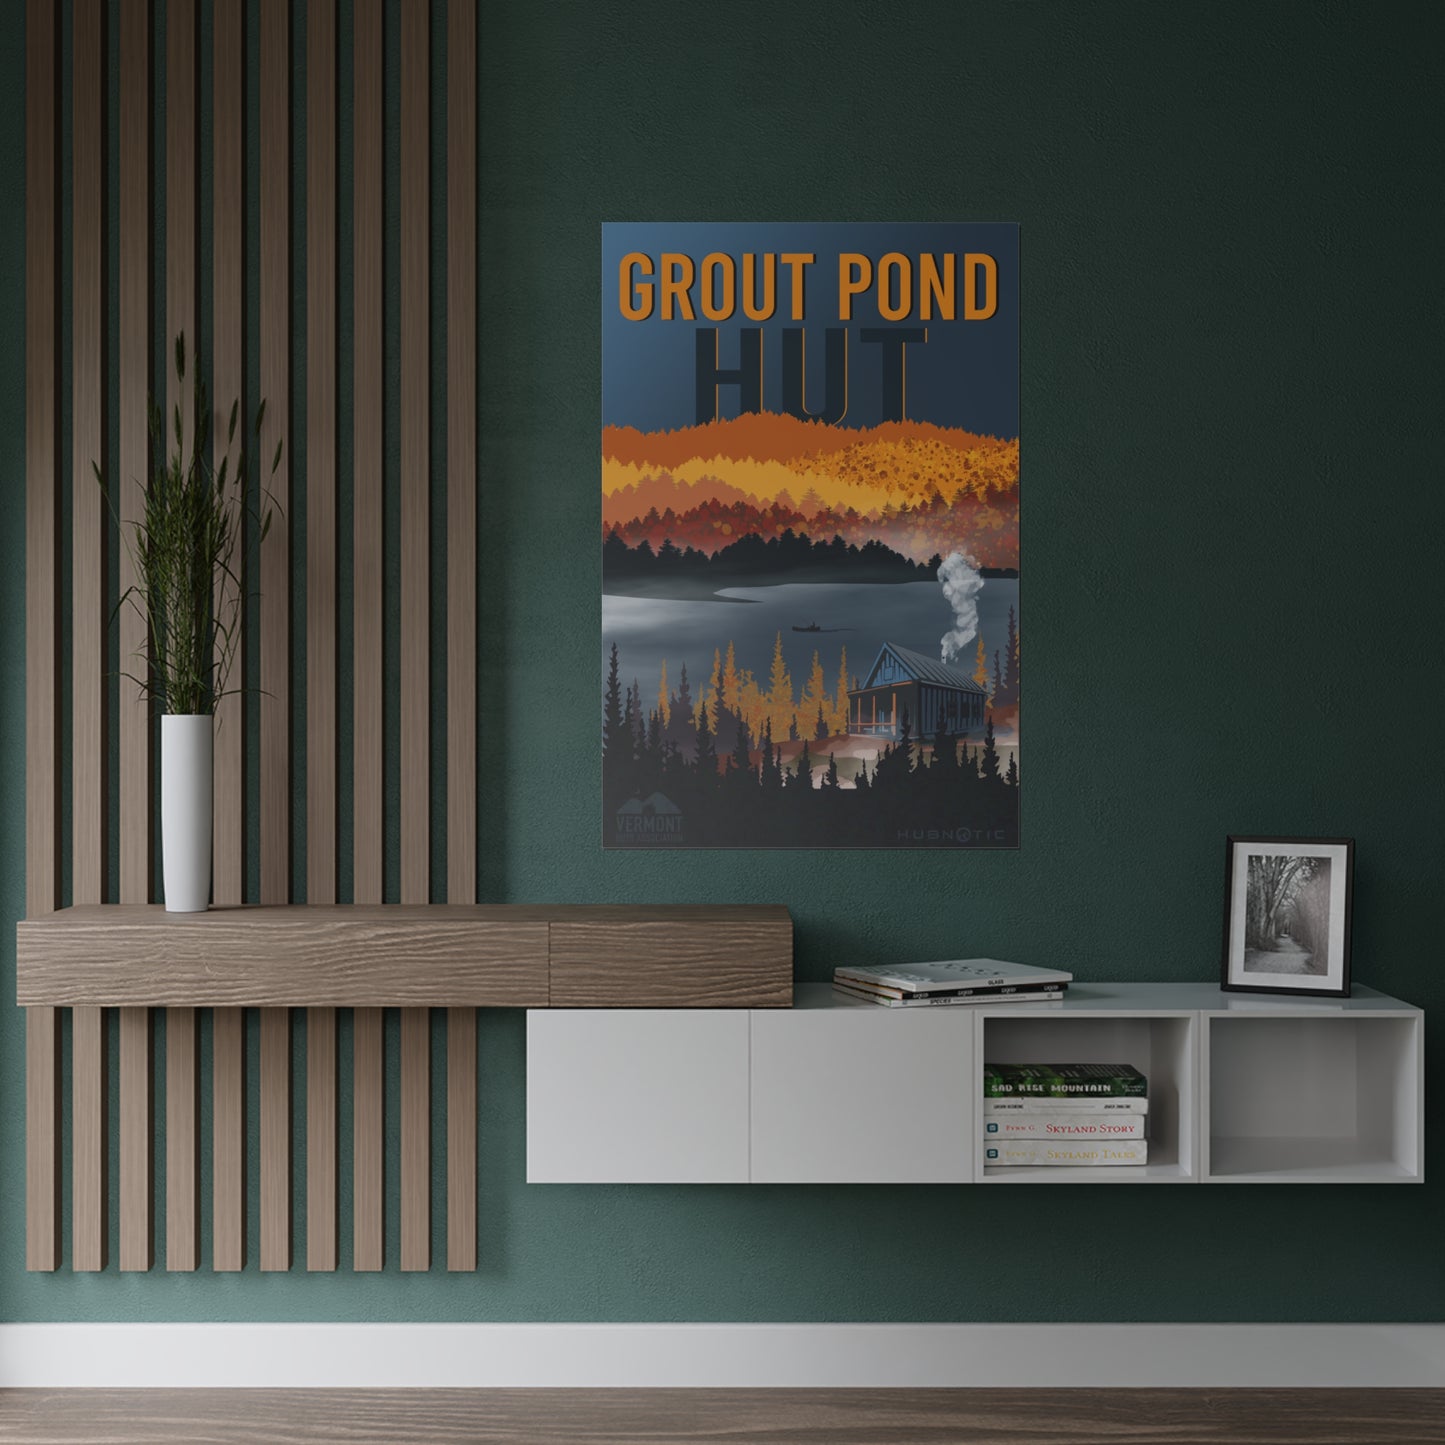 Grout Pond Hut Poster